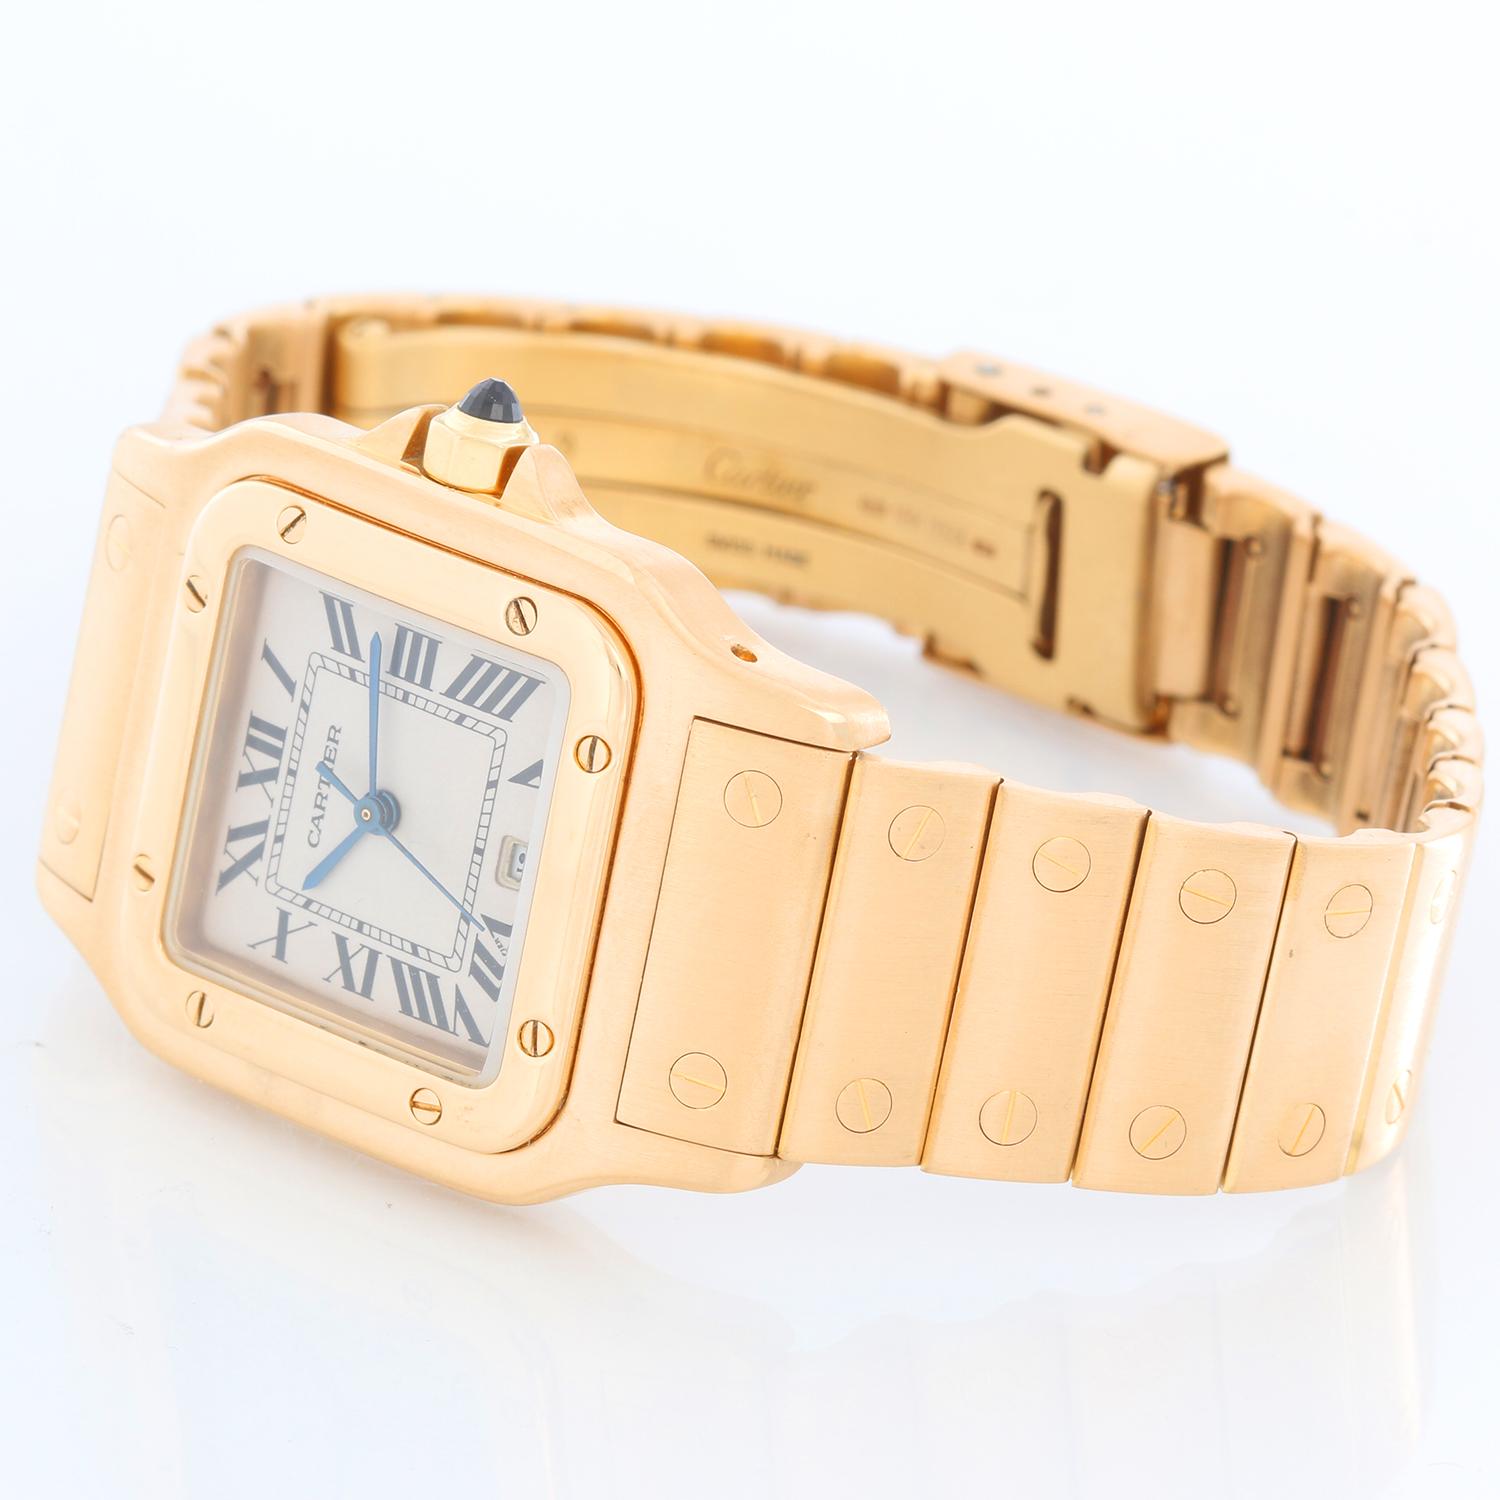 Cartier Santos Men's 18k Yellow Gold Watch W20010C5 - Quartz. 18k yellow gold case (29mm x 41mm). White dial with black Roman numerals and date at 6 o'clock. 18k yellow gold Santos bracelet with deployant clasp. Pre-owned with Cartier box and books. 